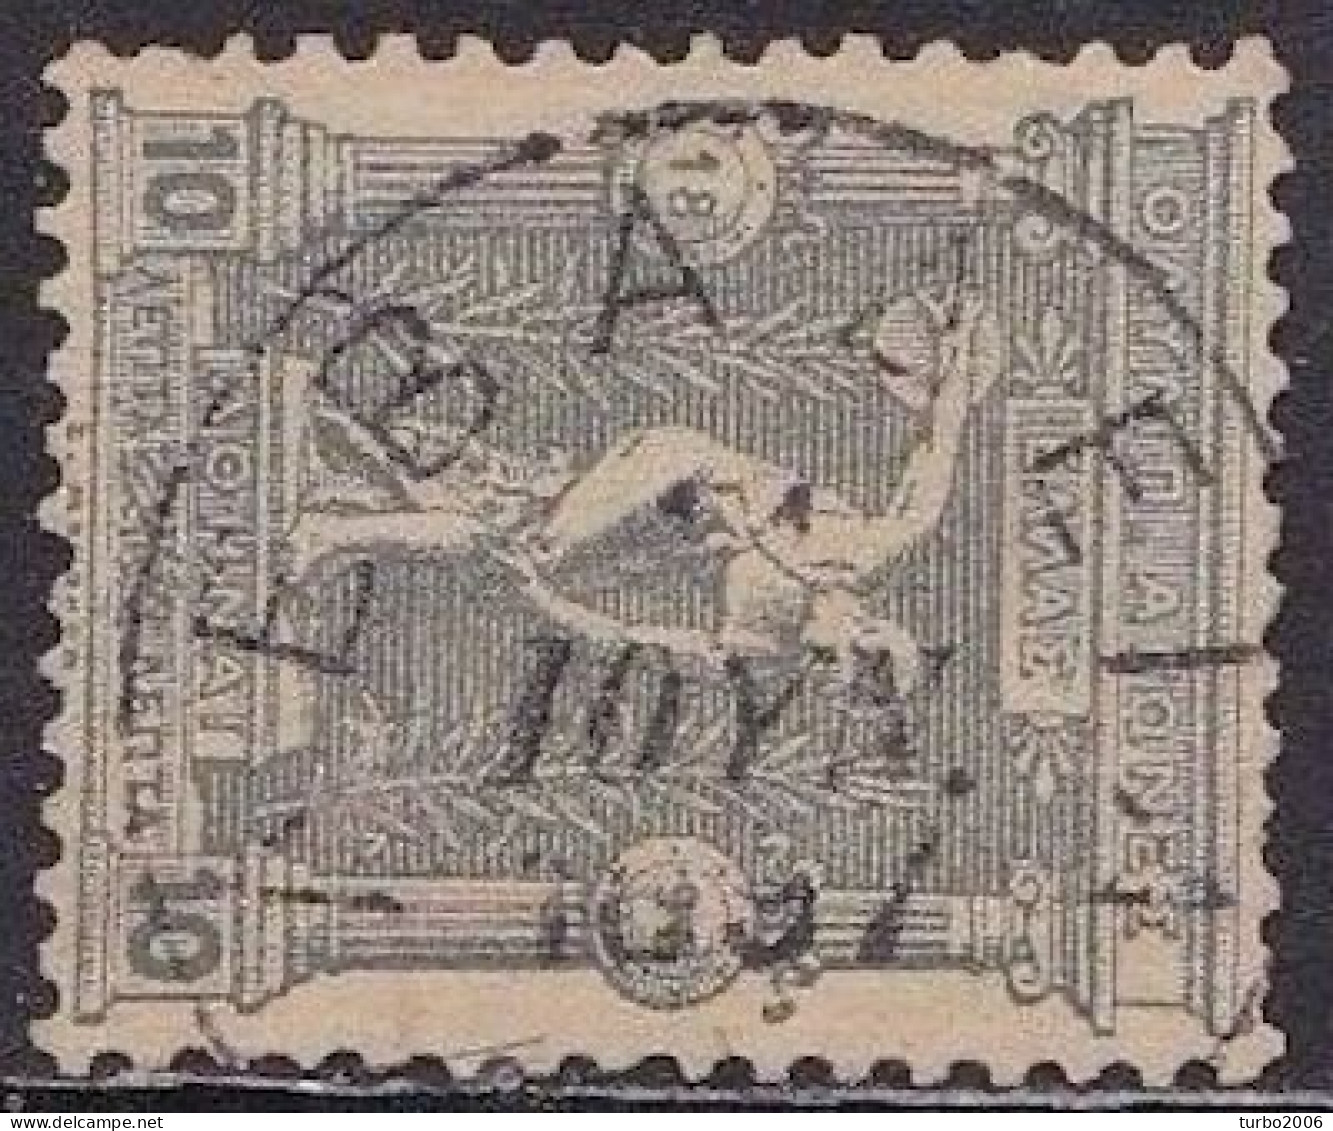 GREECE 1896 First Olympic Games 10 L Grey  Vl. 136 With Cancellation ΛΕΒΑΔΕΙΑ Type V - Used Stamps